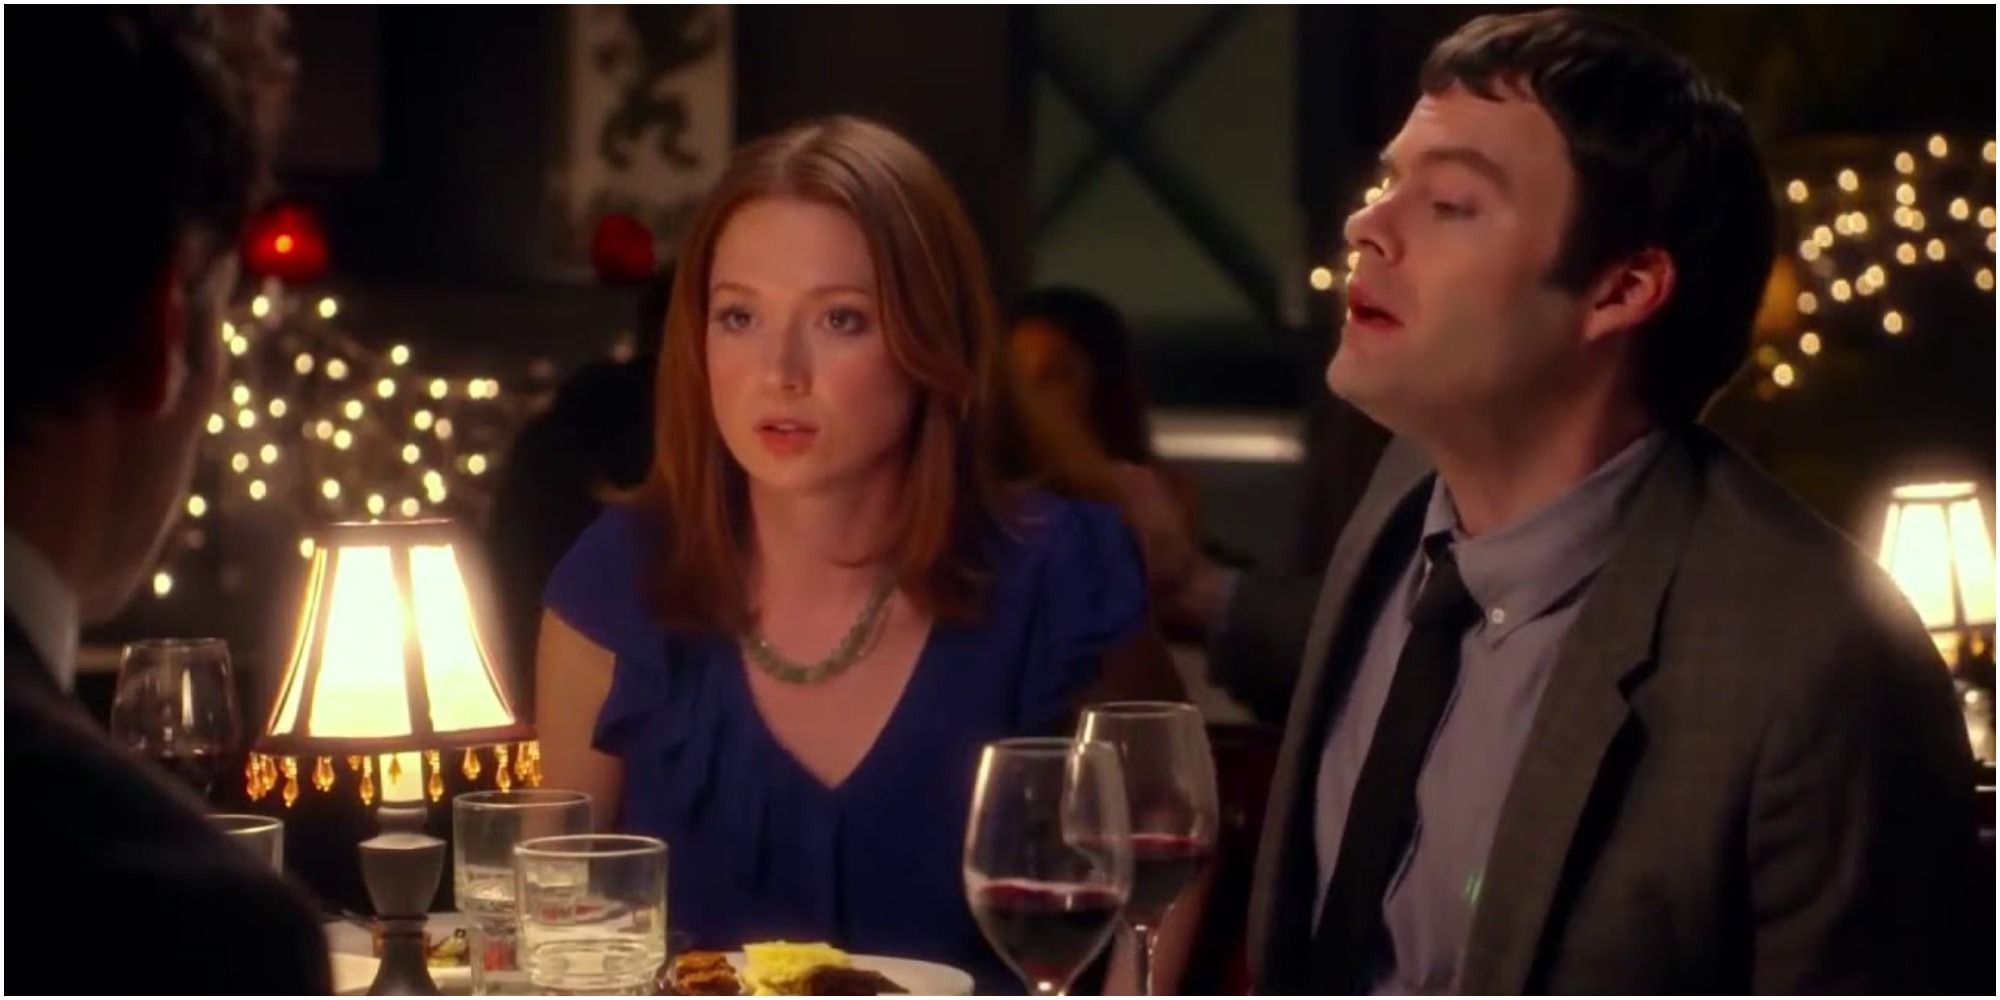 A screenshot of Ellie Kemper as Karen with Kyle (Bill Hader) in They Came Together